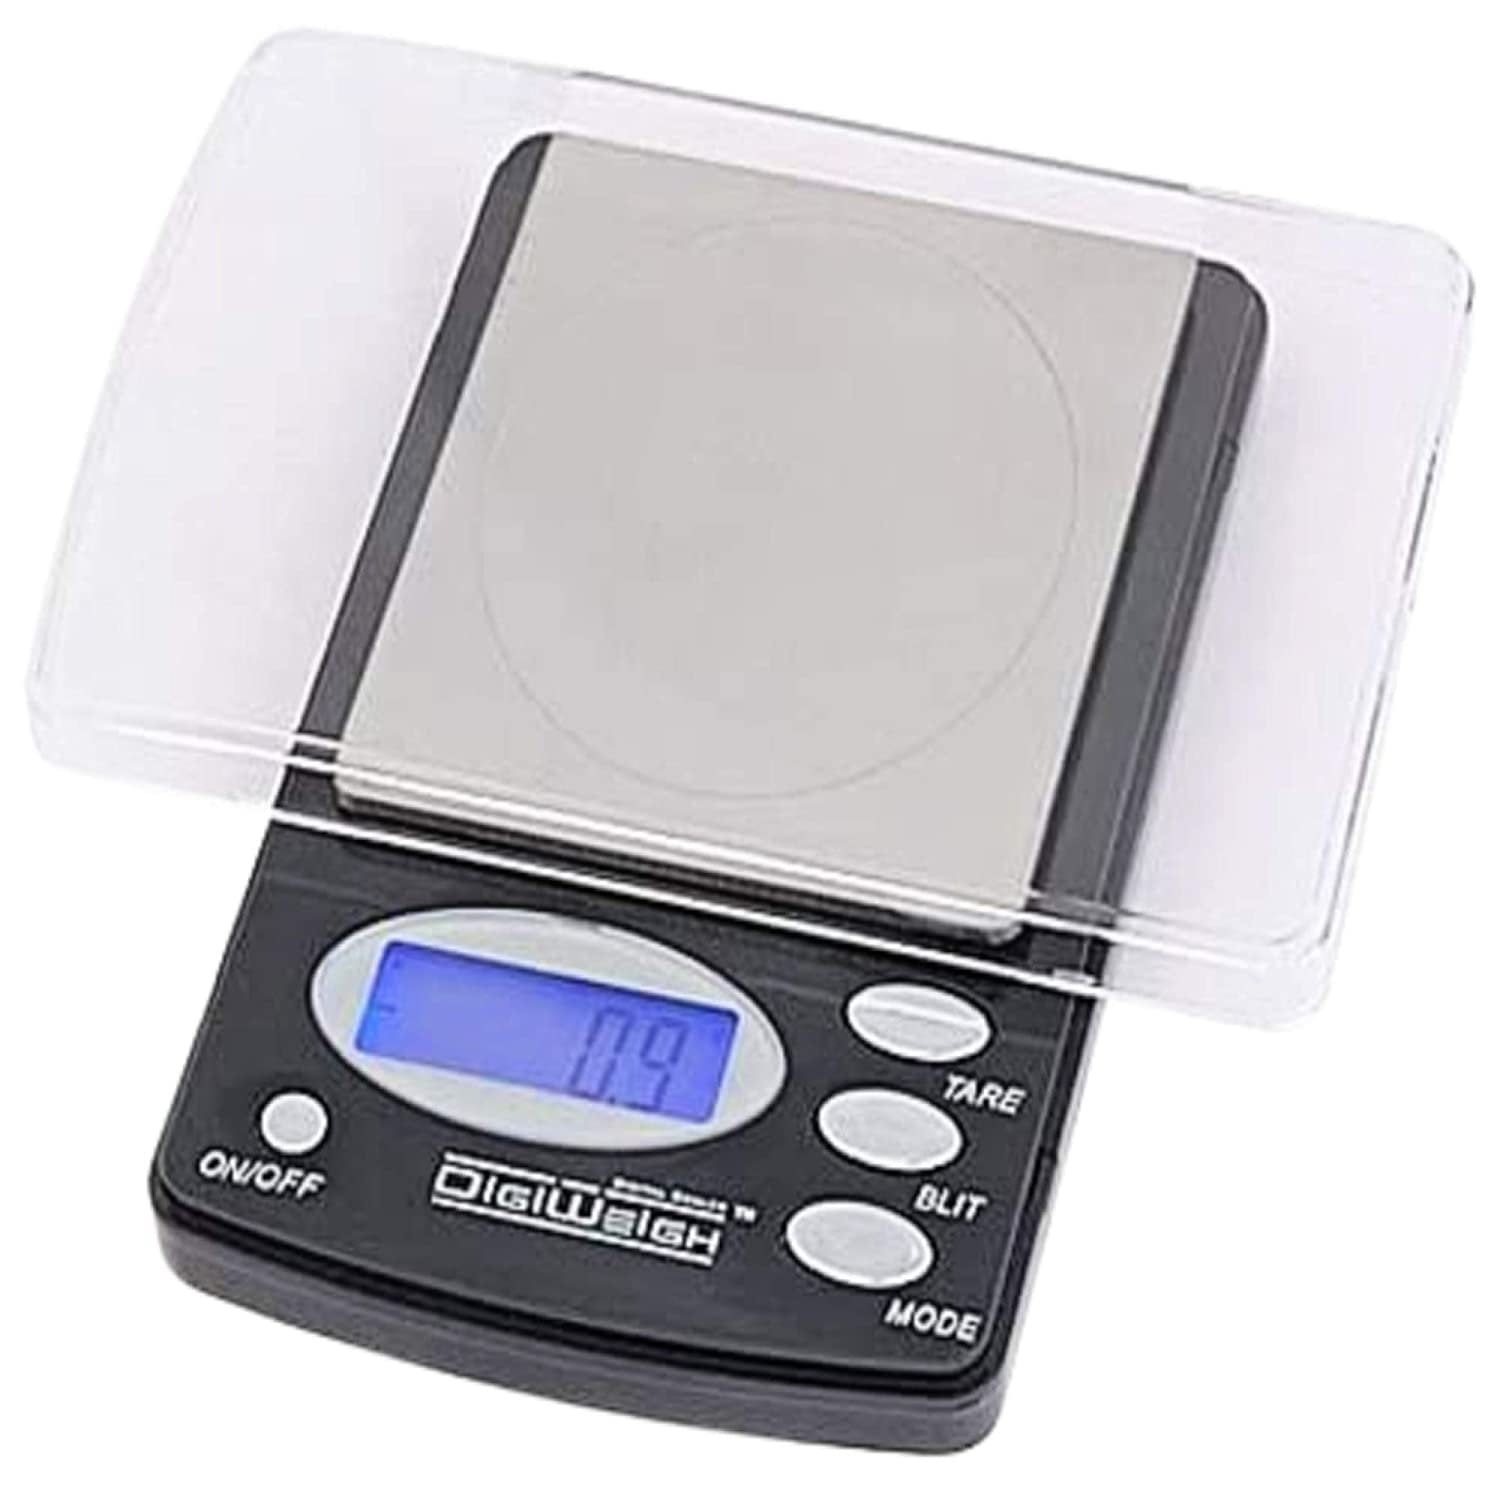 New Personal Coin Scale Pro - Use Troy oz, Grams, Ounces, Pennyweights + to Weigh Gold, Silver, Platinum Coins Bullion Bars Ingots & More, Size: 2.5